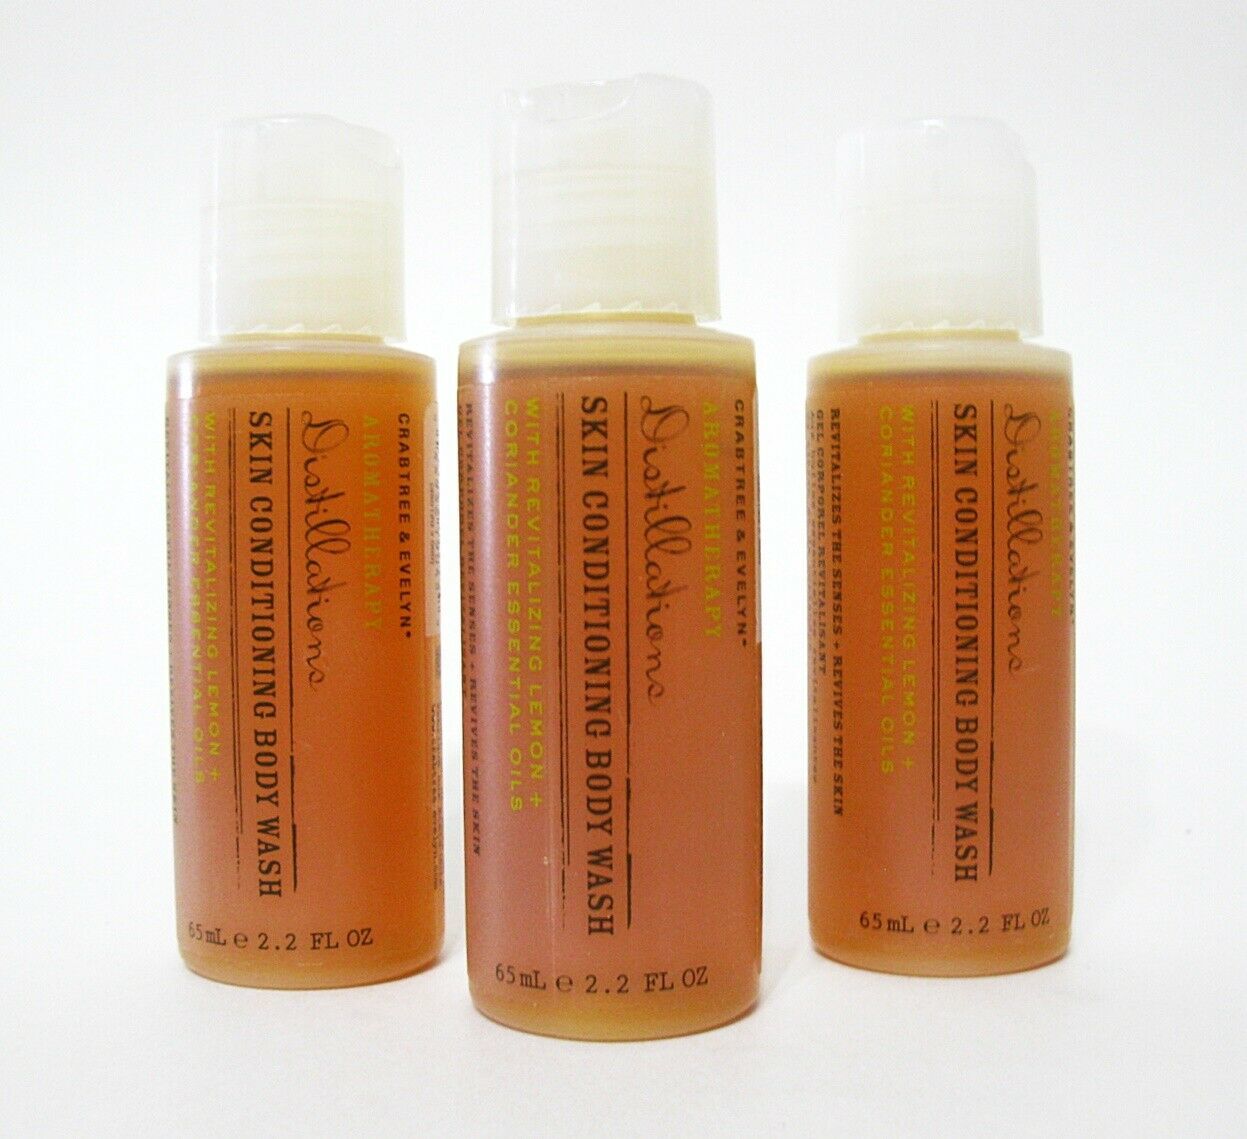 Primary image for 3 x Crabtree & Evelyn Aromatherapy Distillations Body Wash - Lemon & Coriander